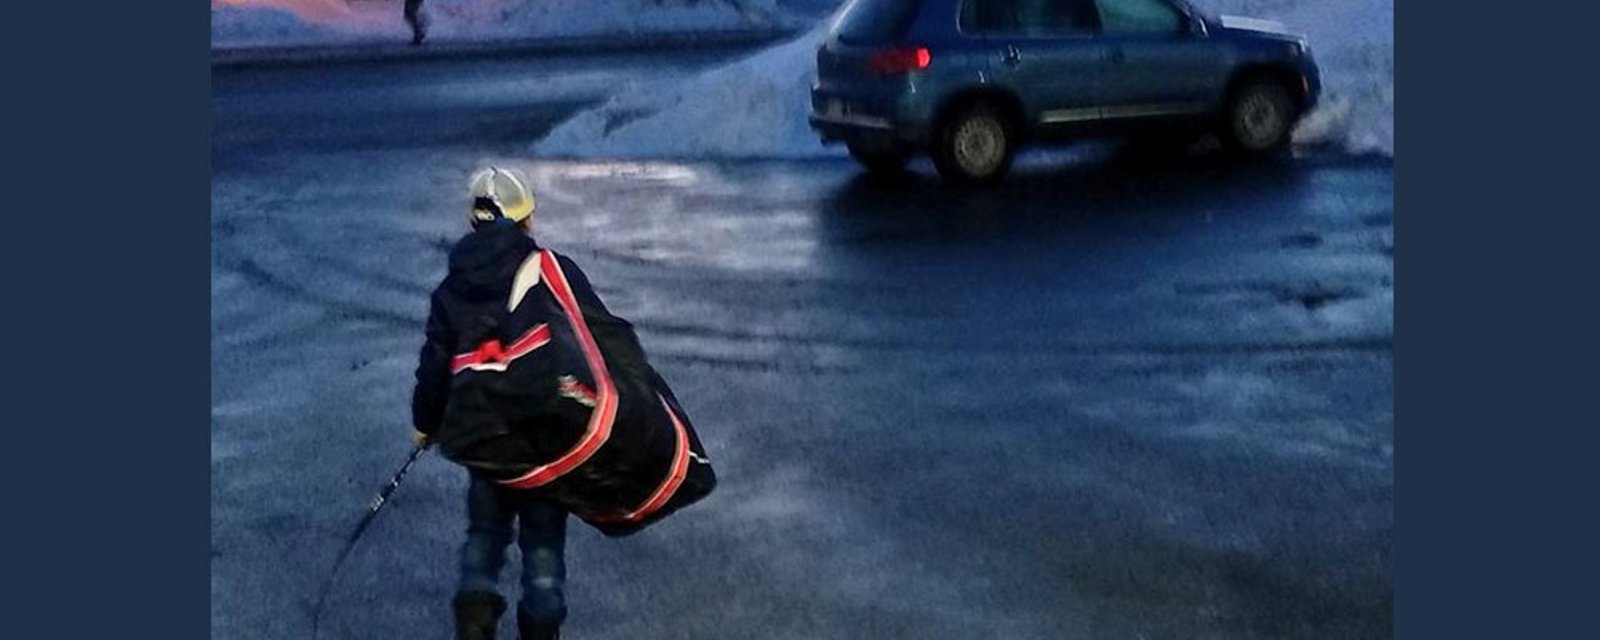 Newfoundland town steps up for 8 year old Syrian refugee, gives him free gear and hockey lessons!